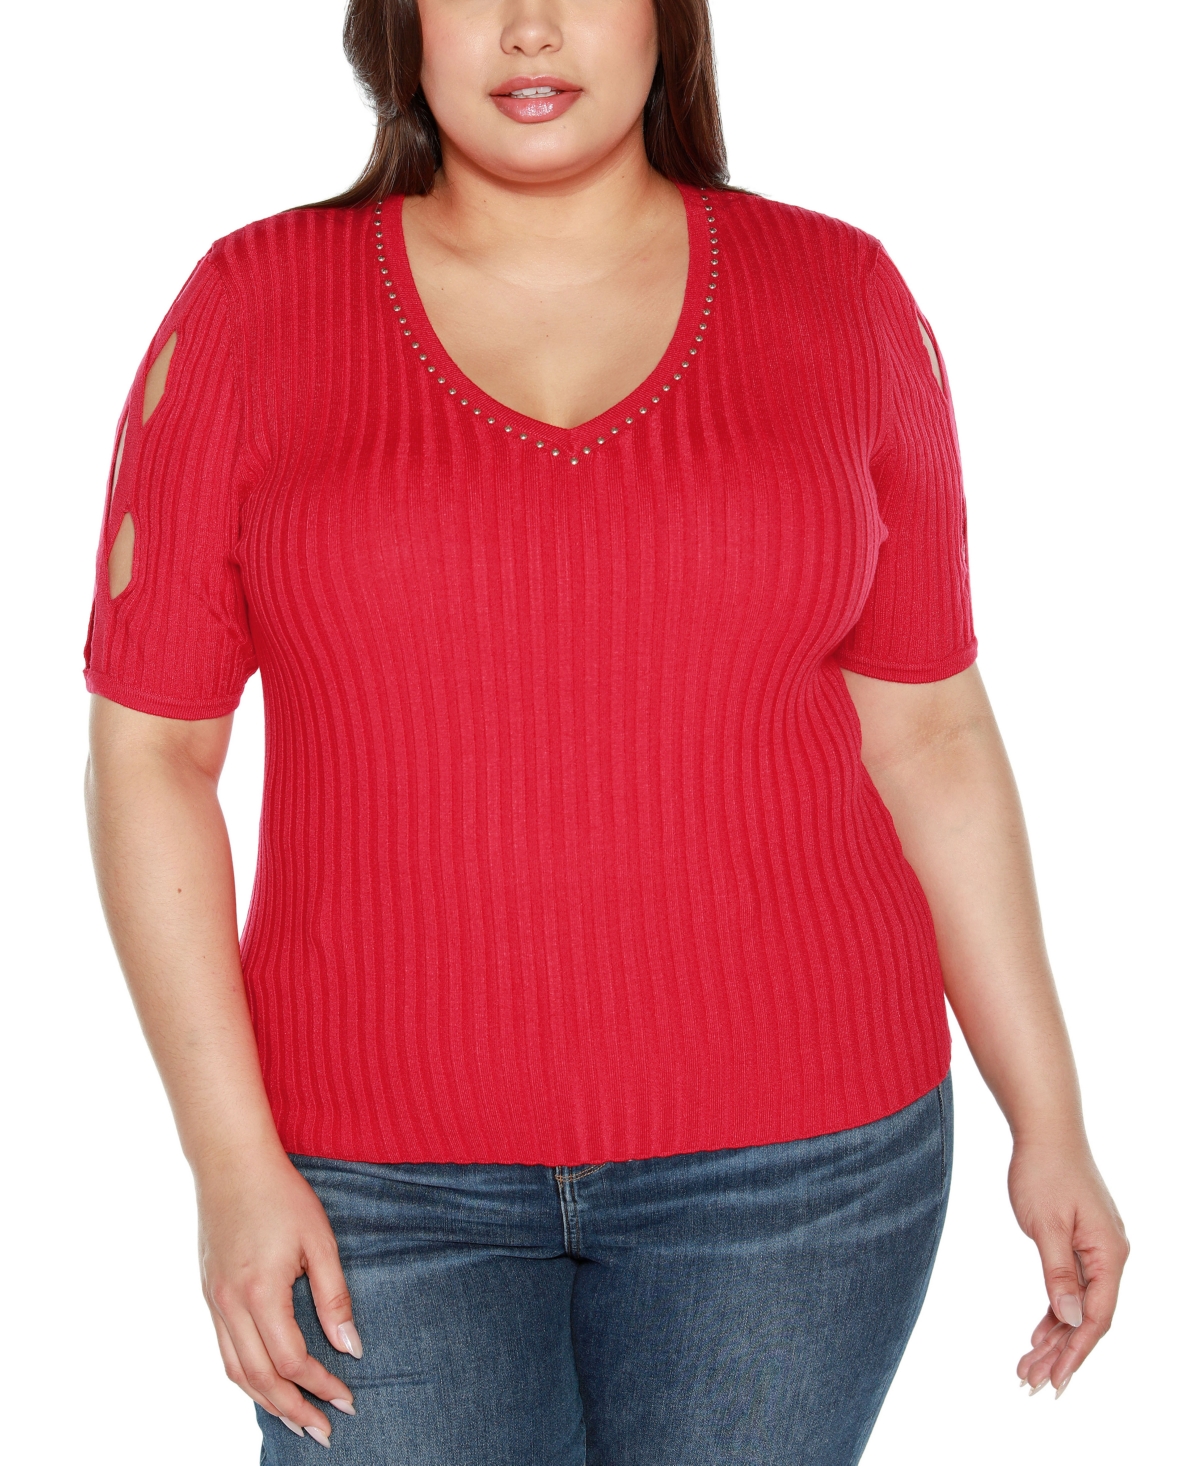 Belldini Black Label Plus Size Embellished Criss Cross Sleeve Sweater In Infrared